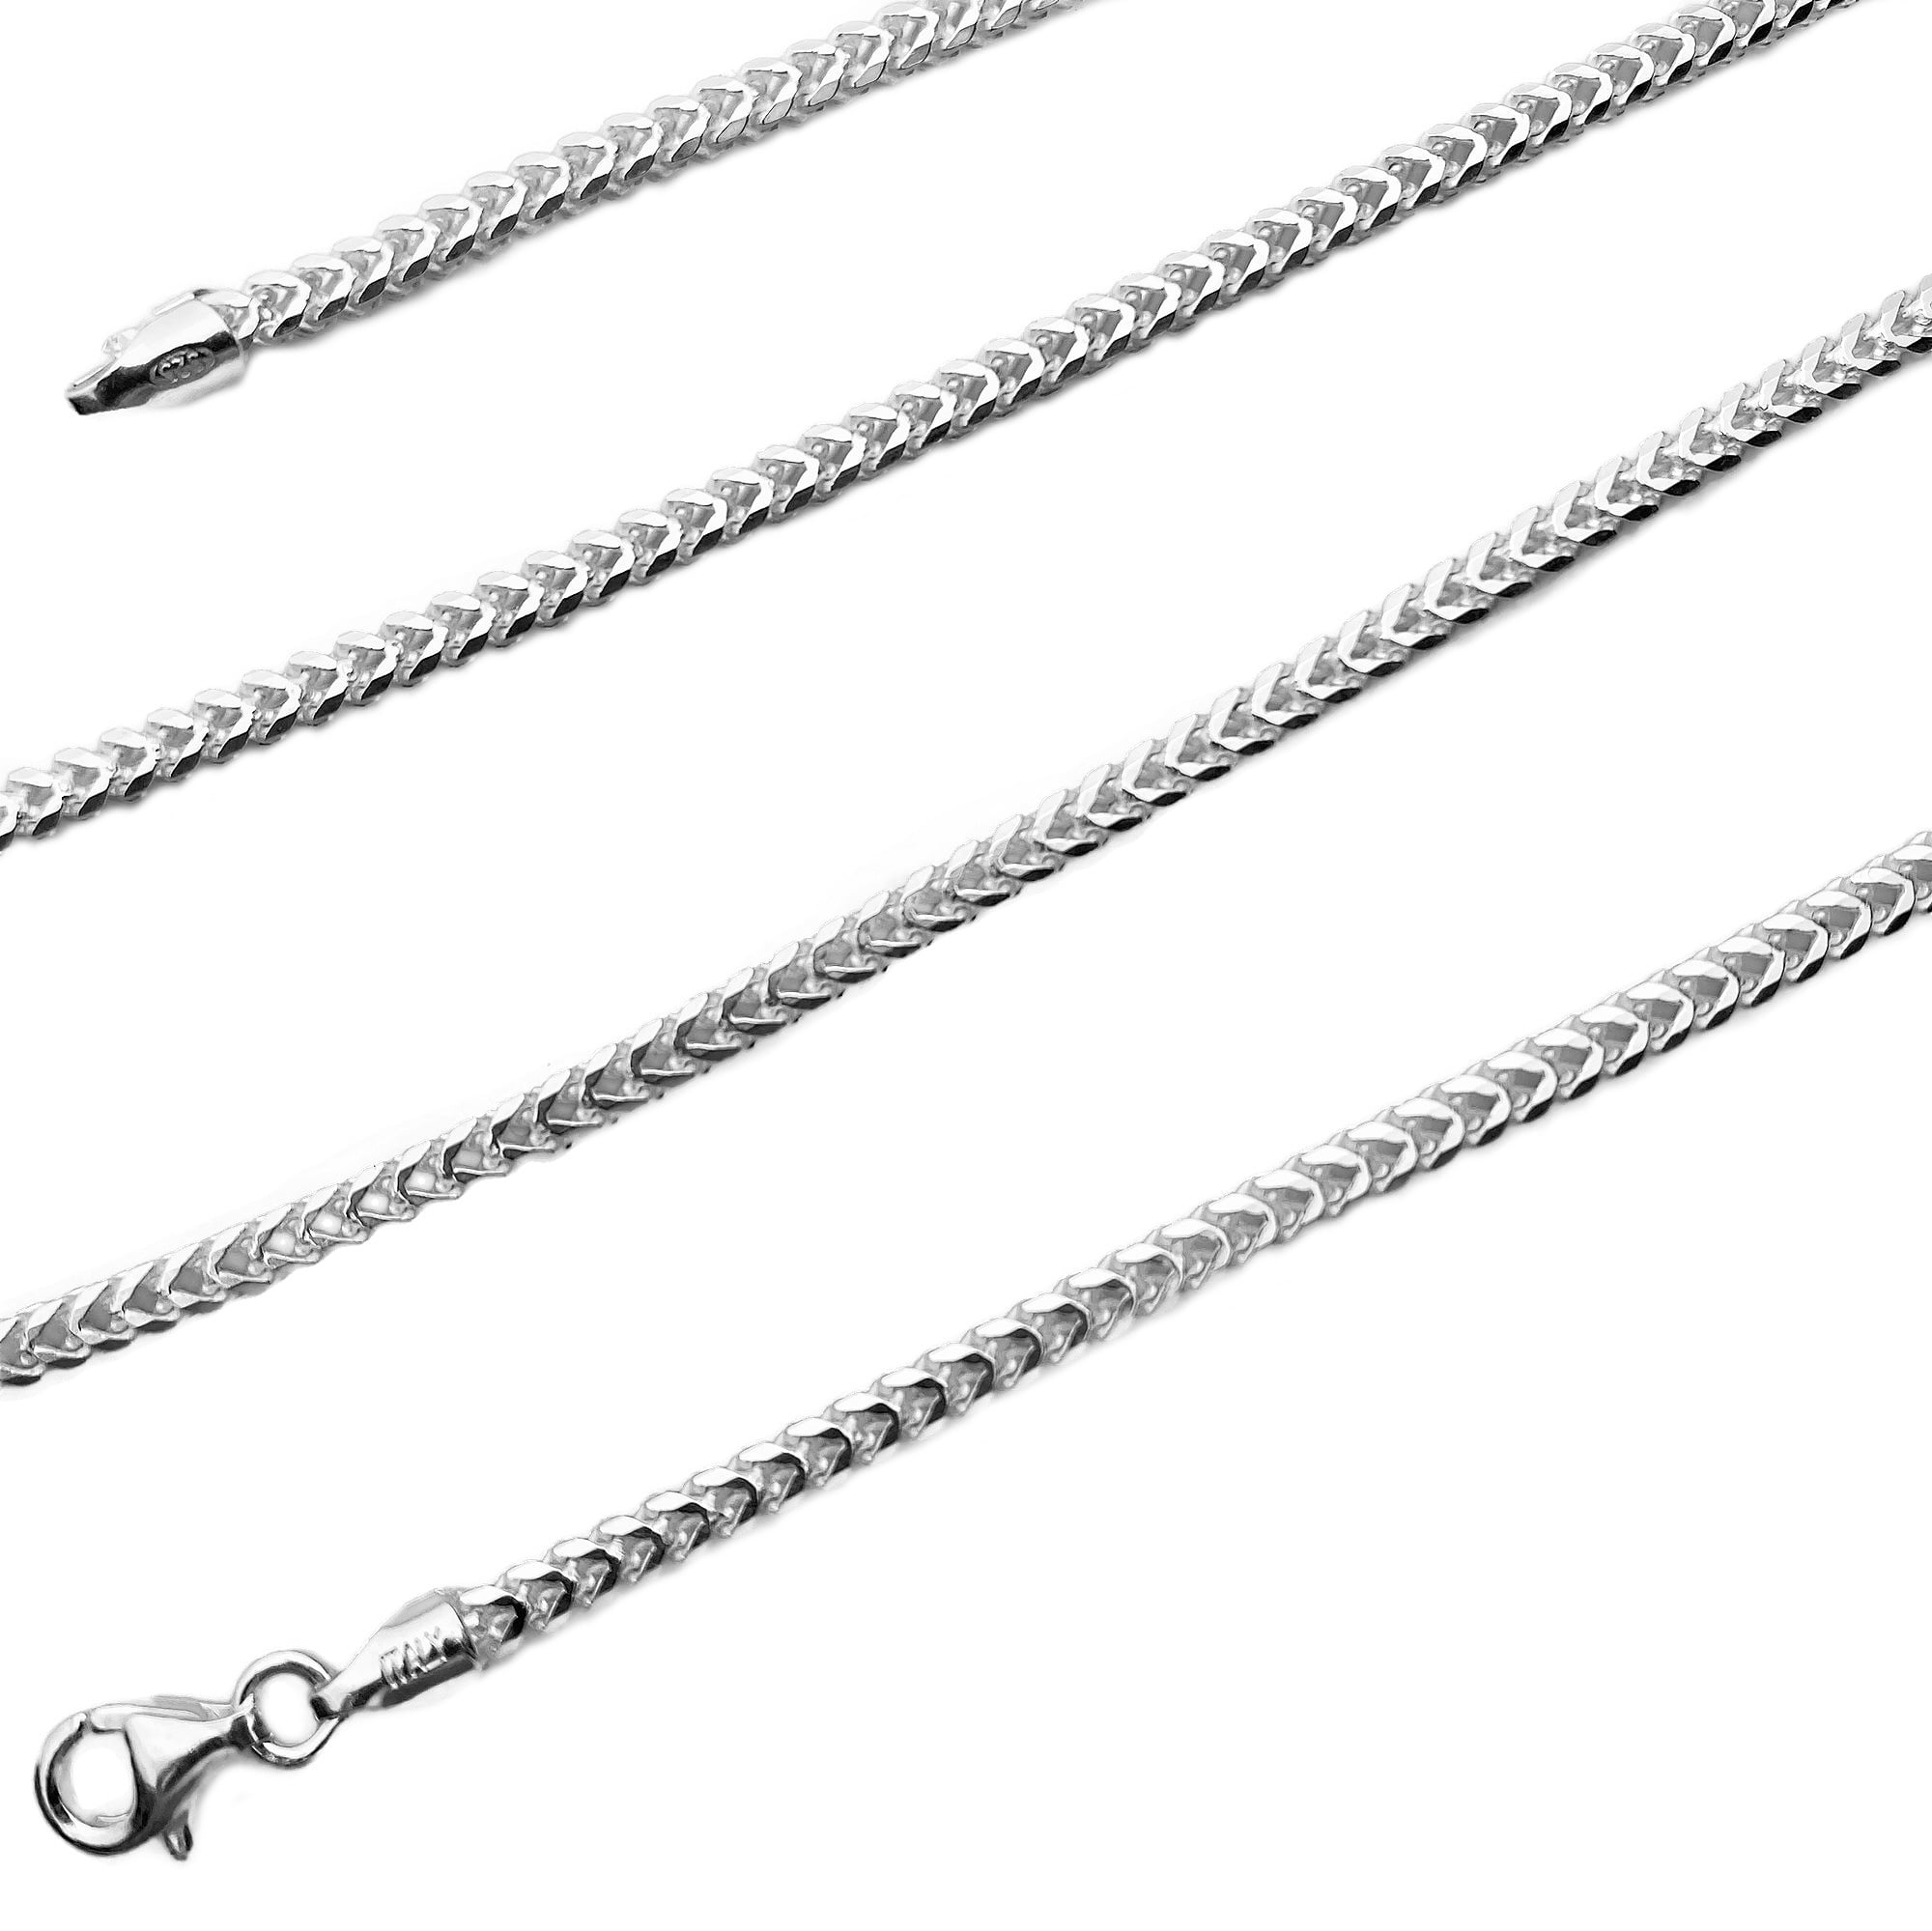 PriceRock Sterling Silver Spiga Chain Necklace 20 Inches